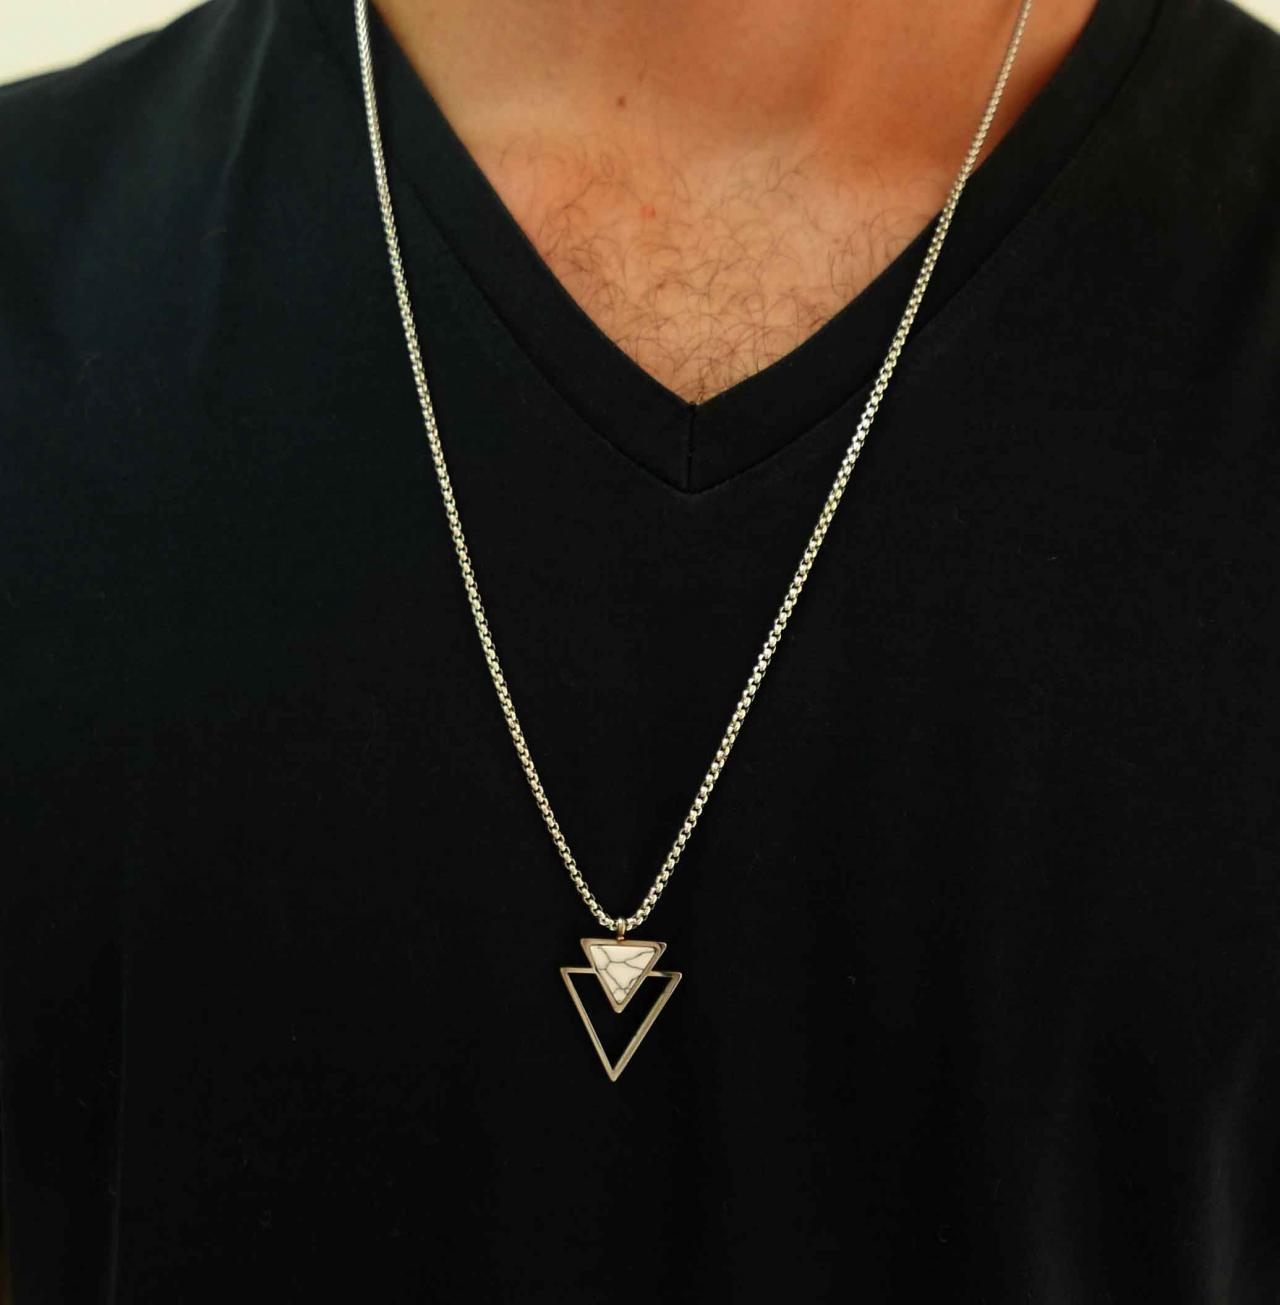 Men's Necklace - Men's Stainless Steel Necklace - Men's Geometric Necklace - Men's Pendant - Men's